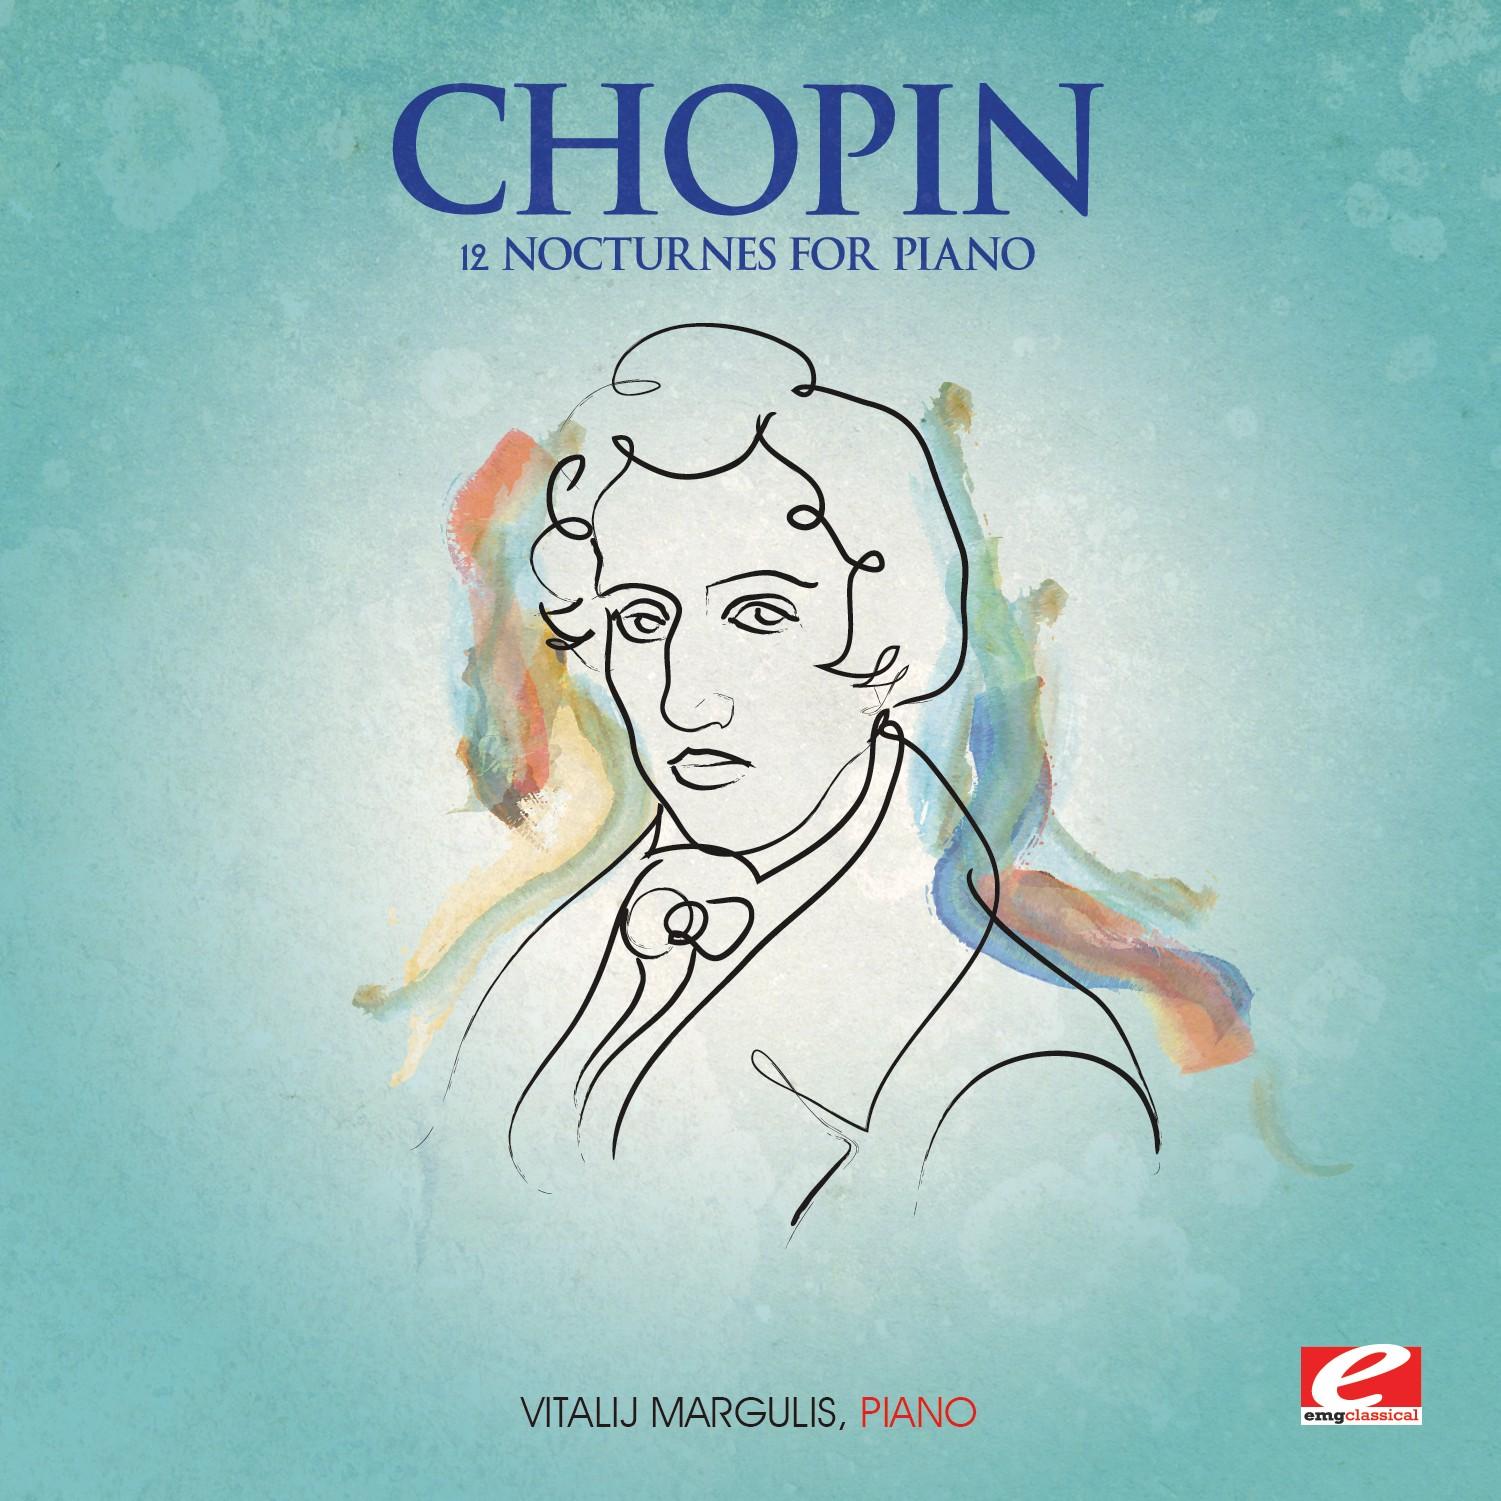 Nocturne No. 5 for Piano in F-Sharp Major, Op. 15, No. 2